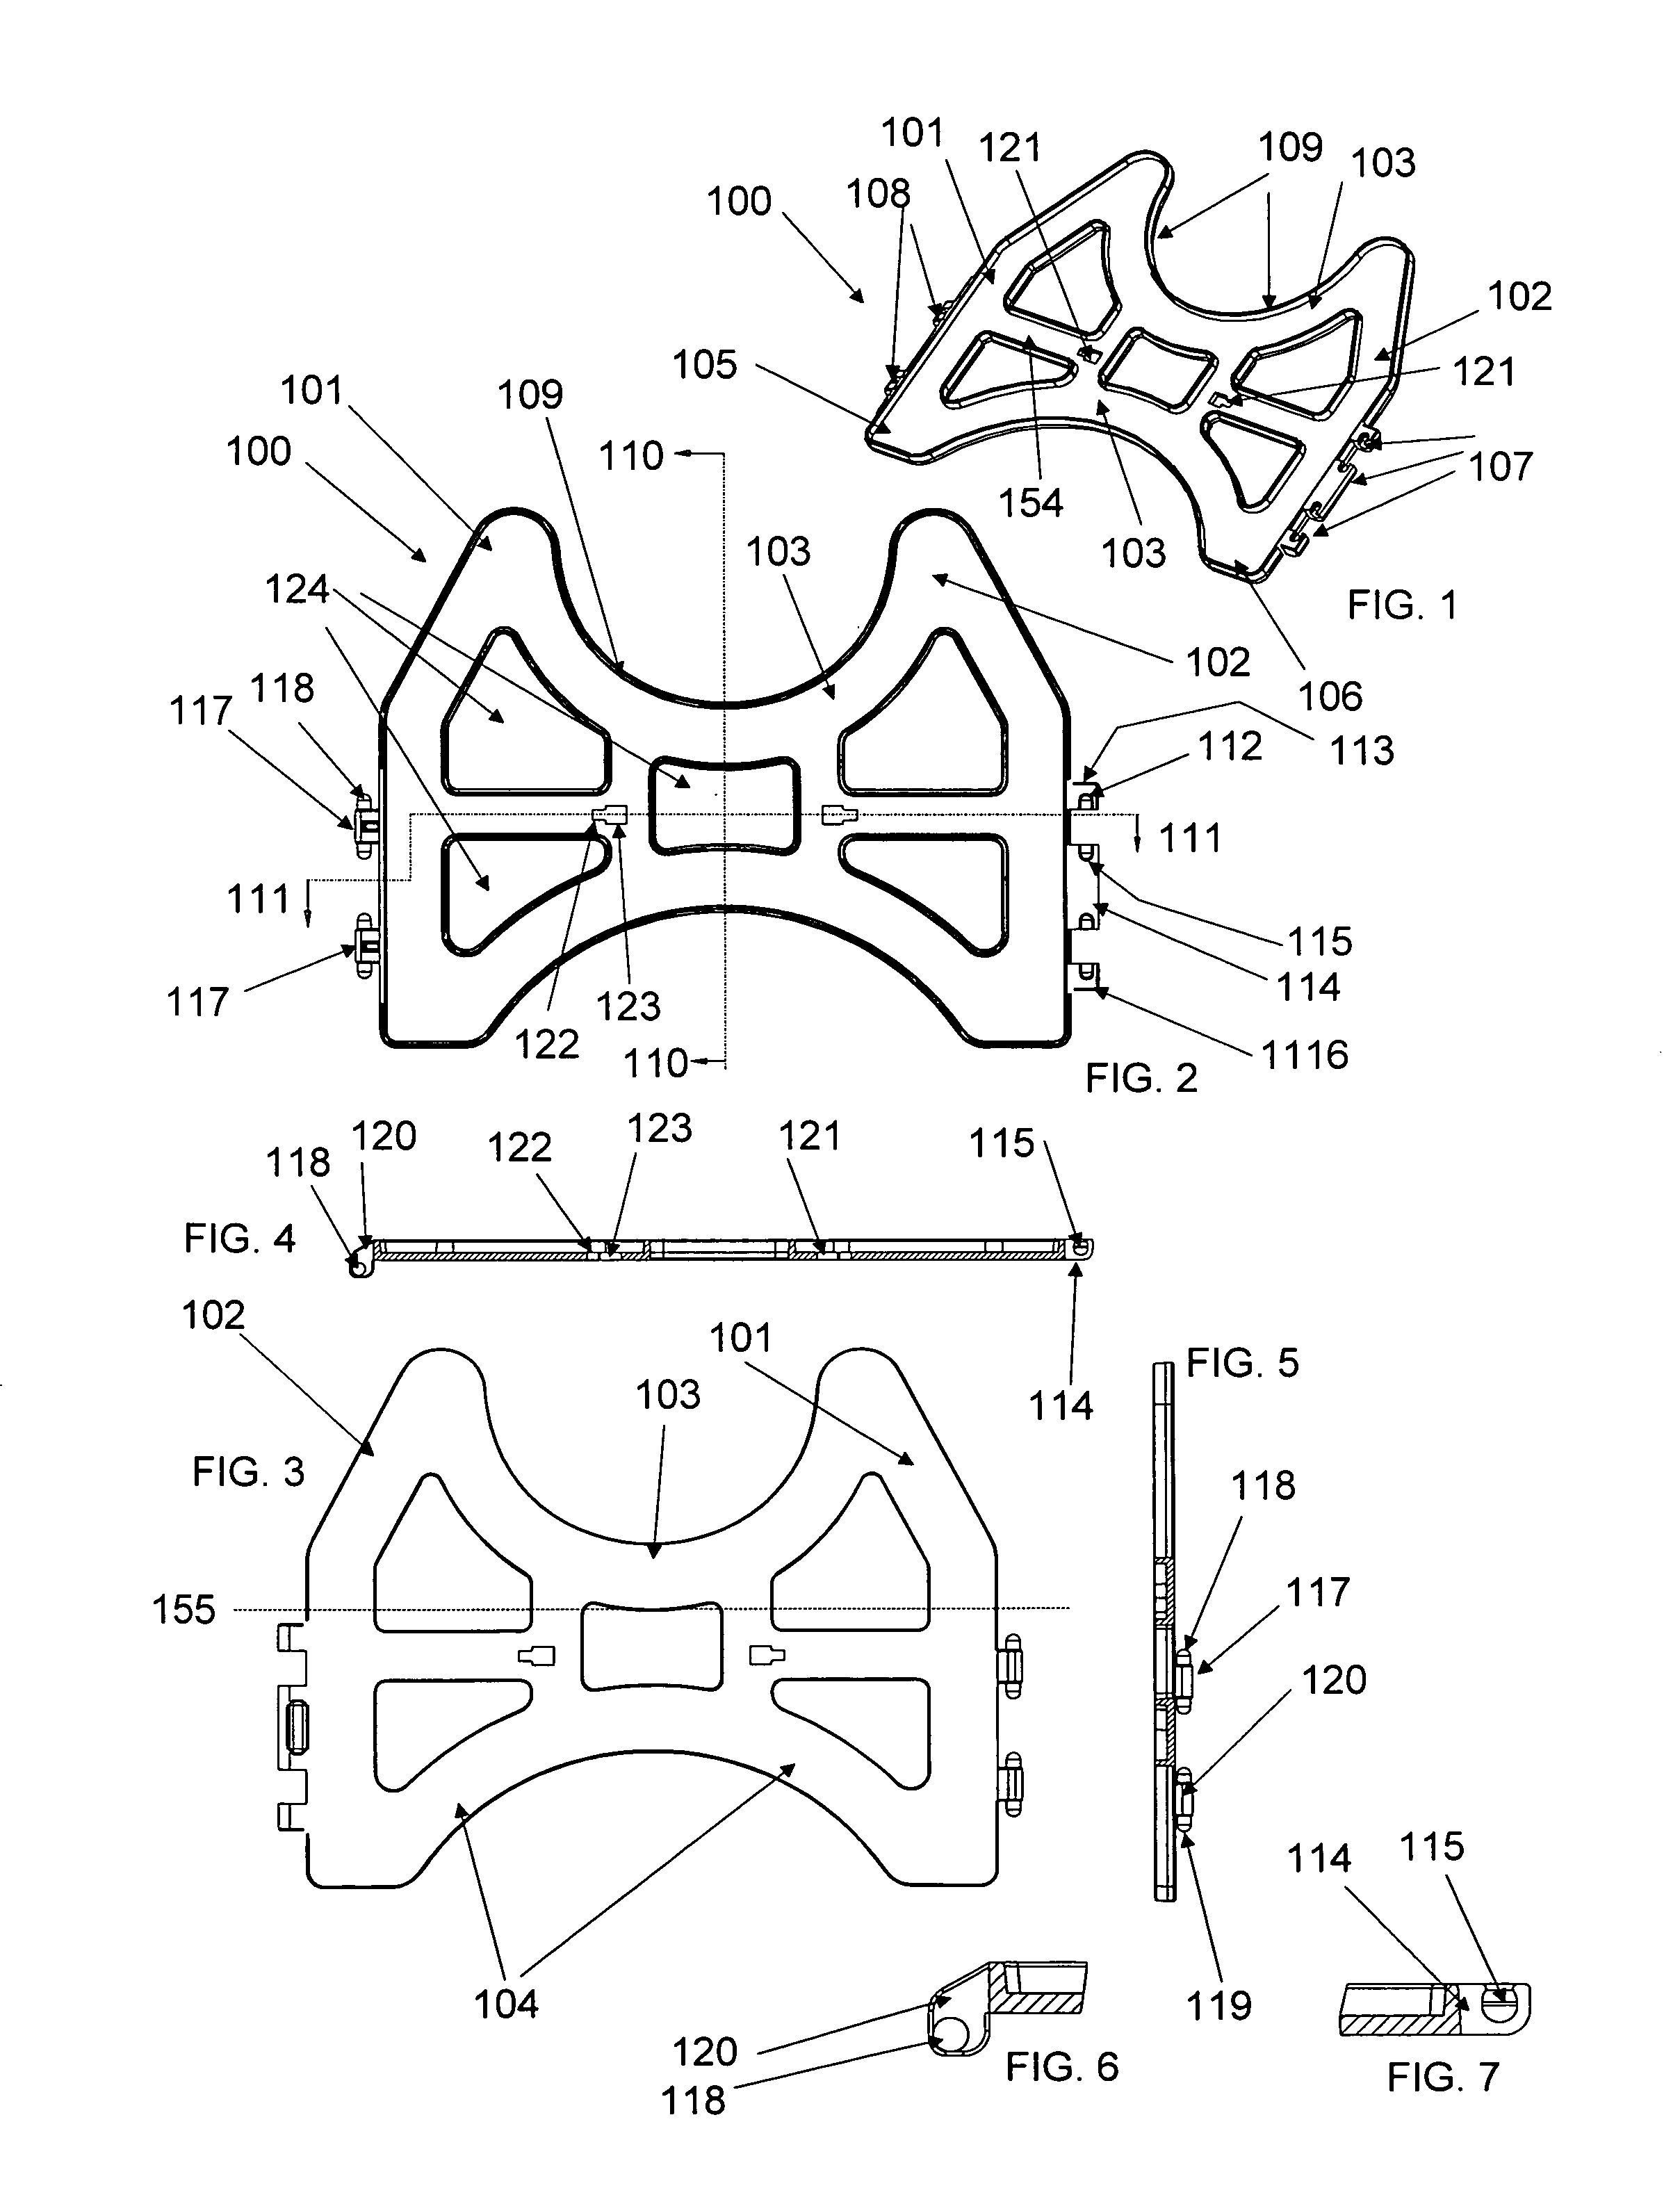 Expandable support for sewer or drainage conduit